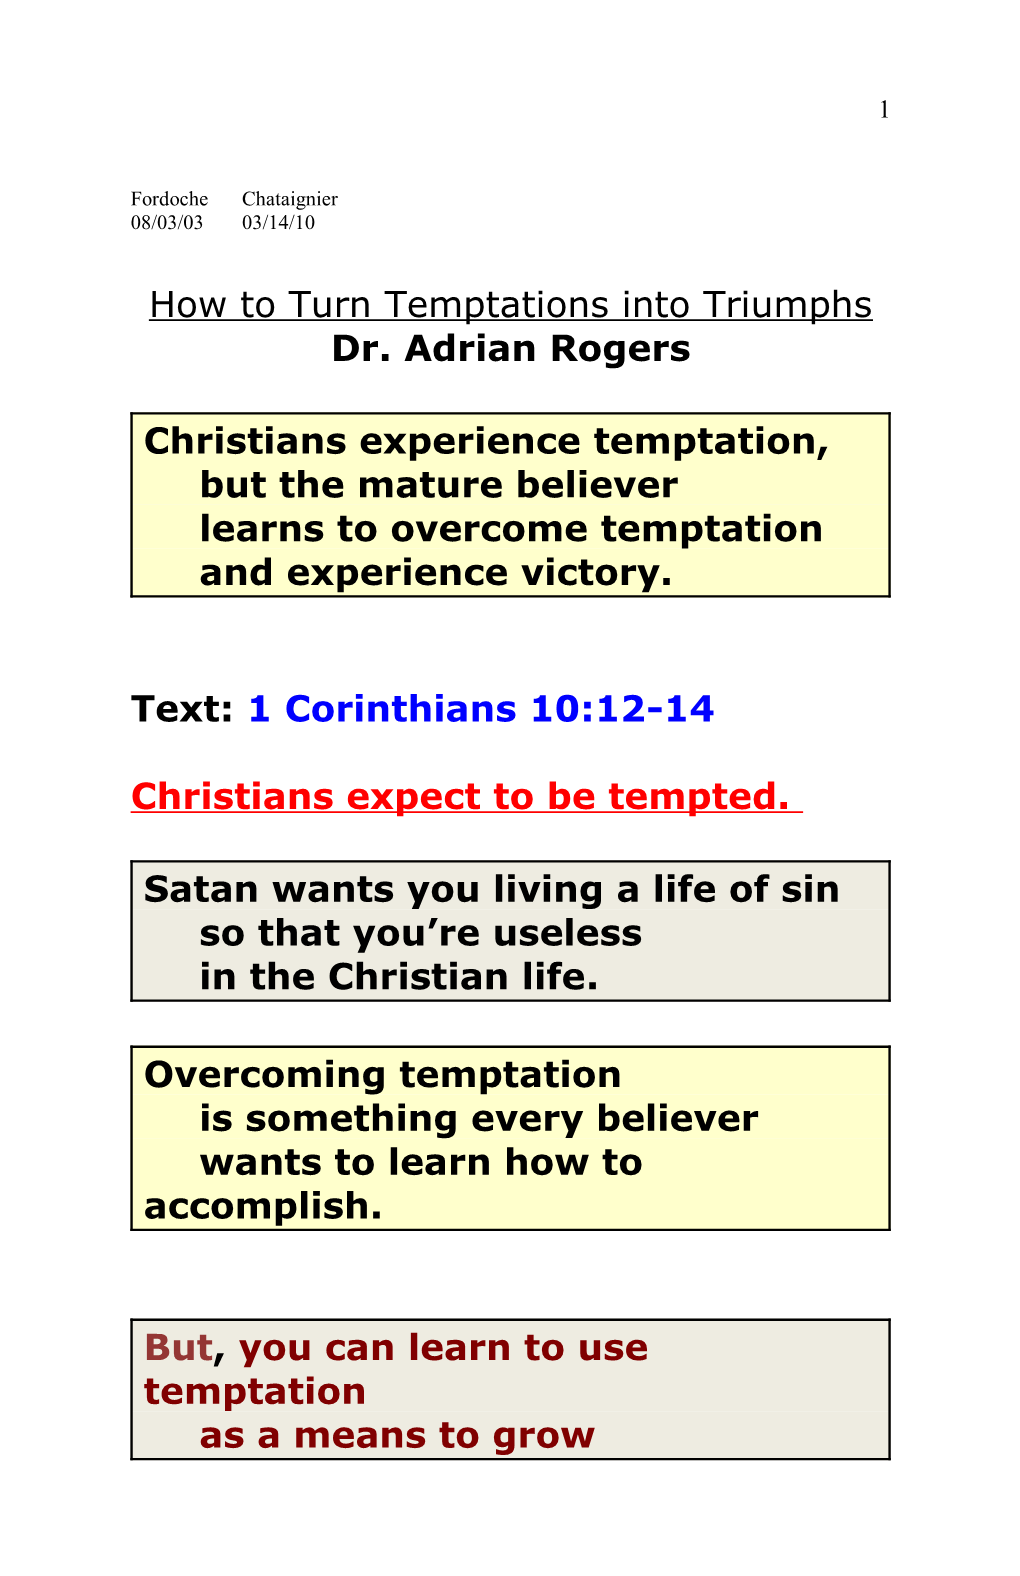 How to Turn Temptations Into Triumphs